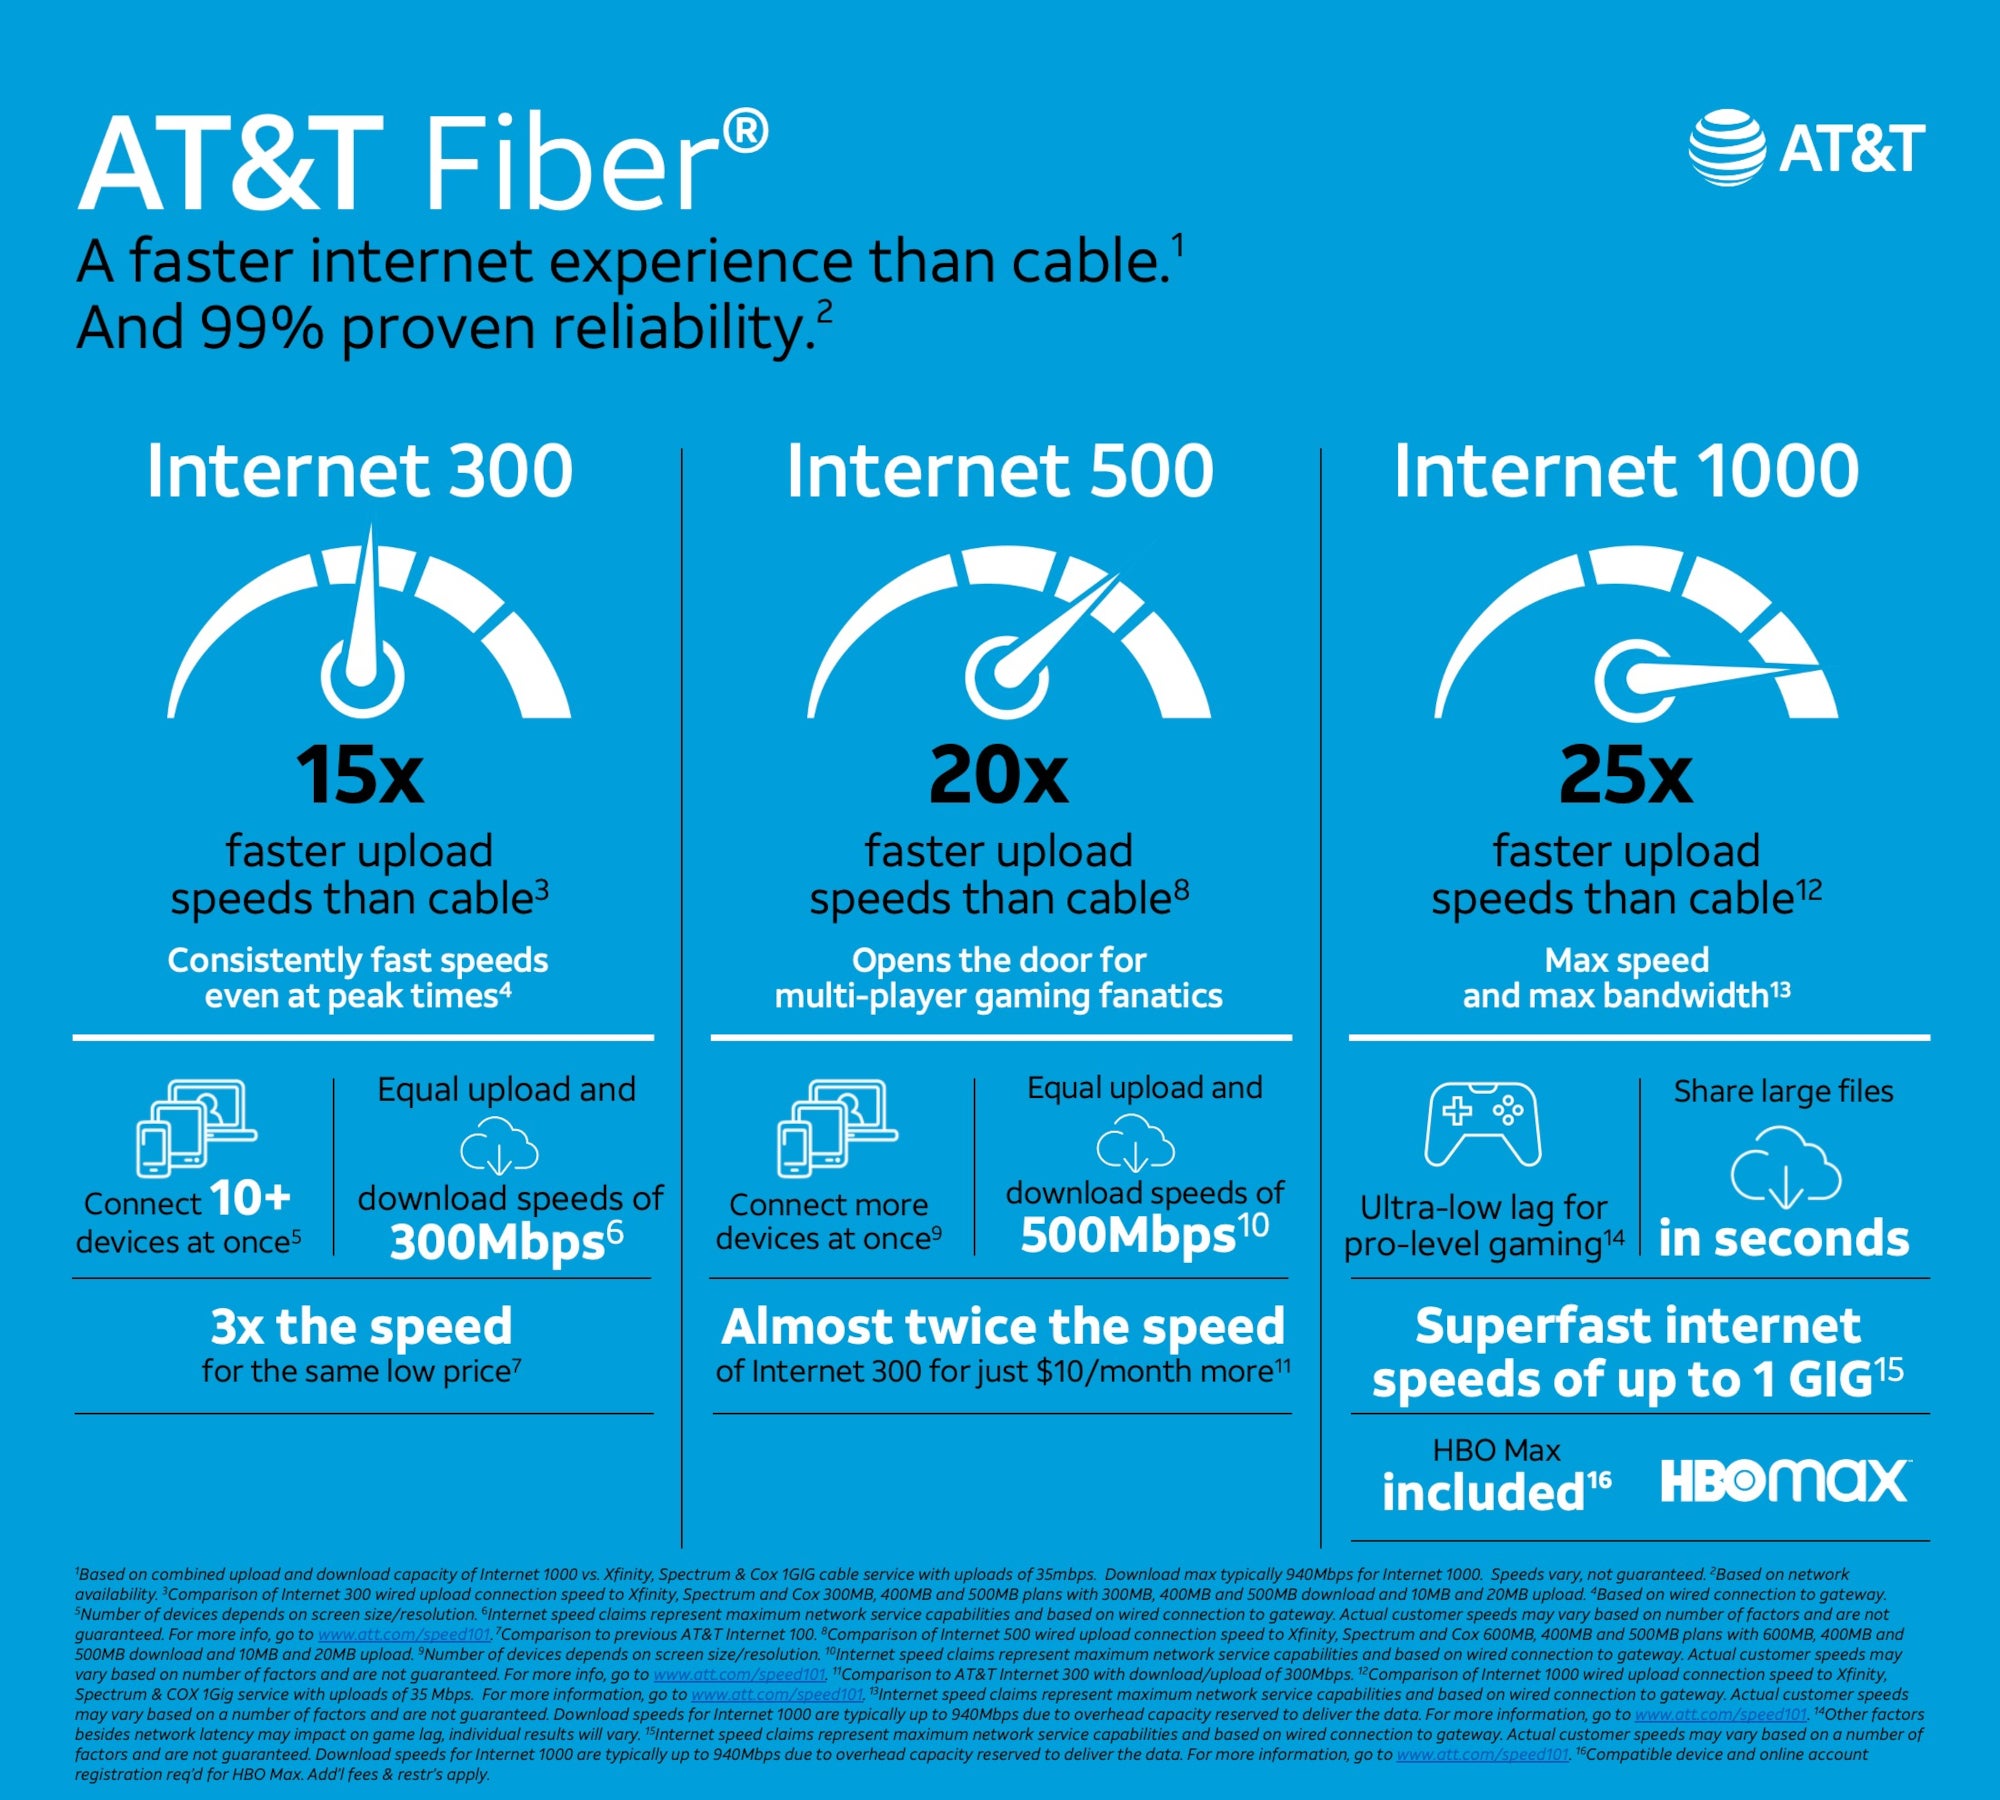 AT&T raises internet speeds for entry and middle Fiber plans